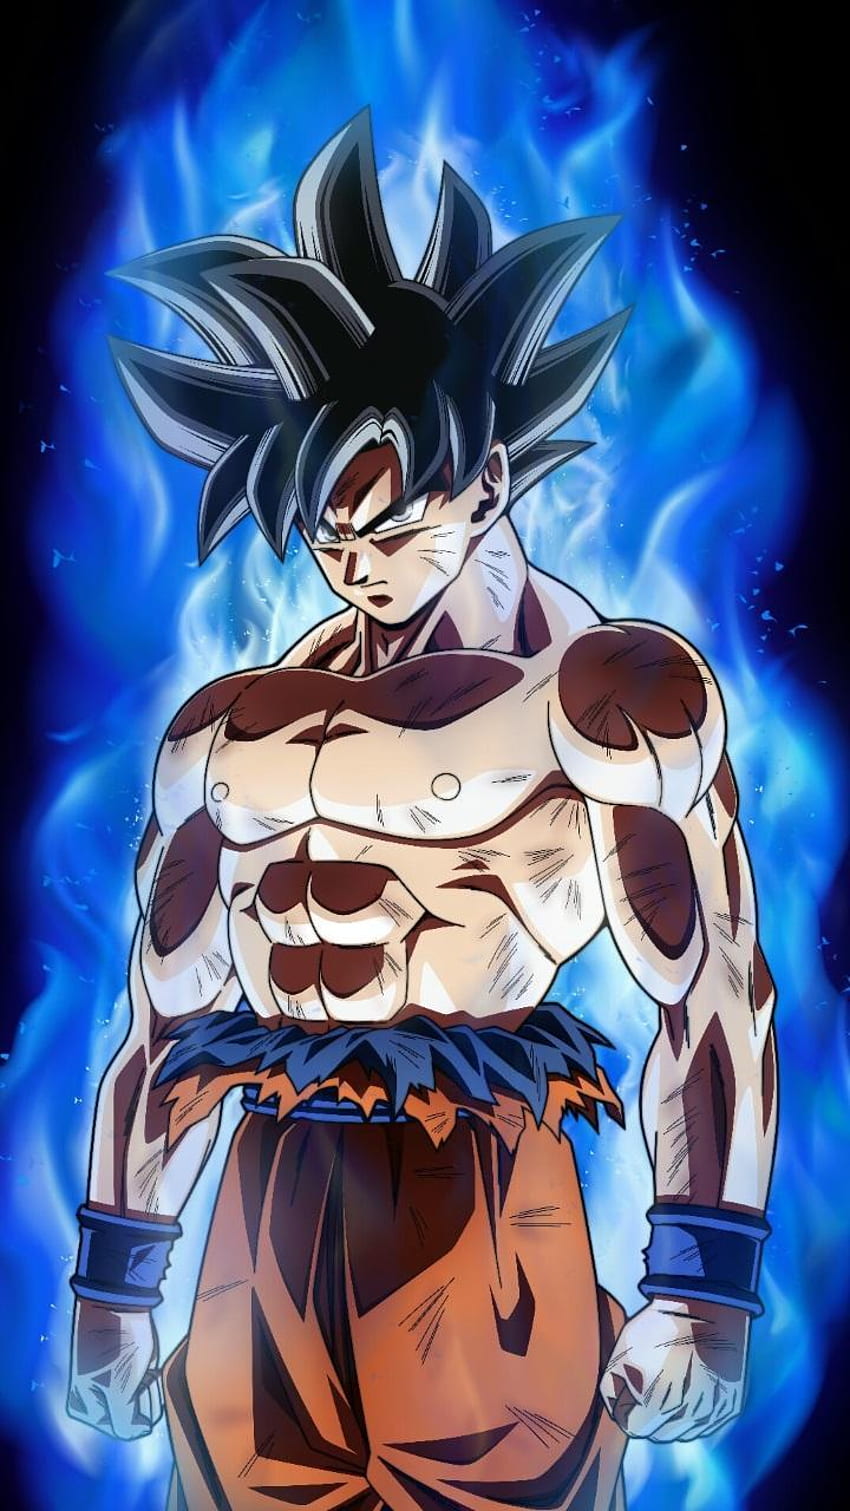 Goku Anime Super HD Lock Screen APK for Android Download